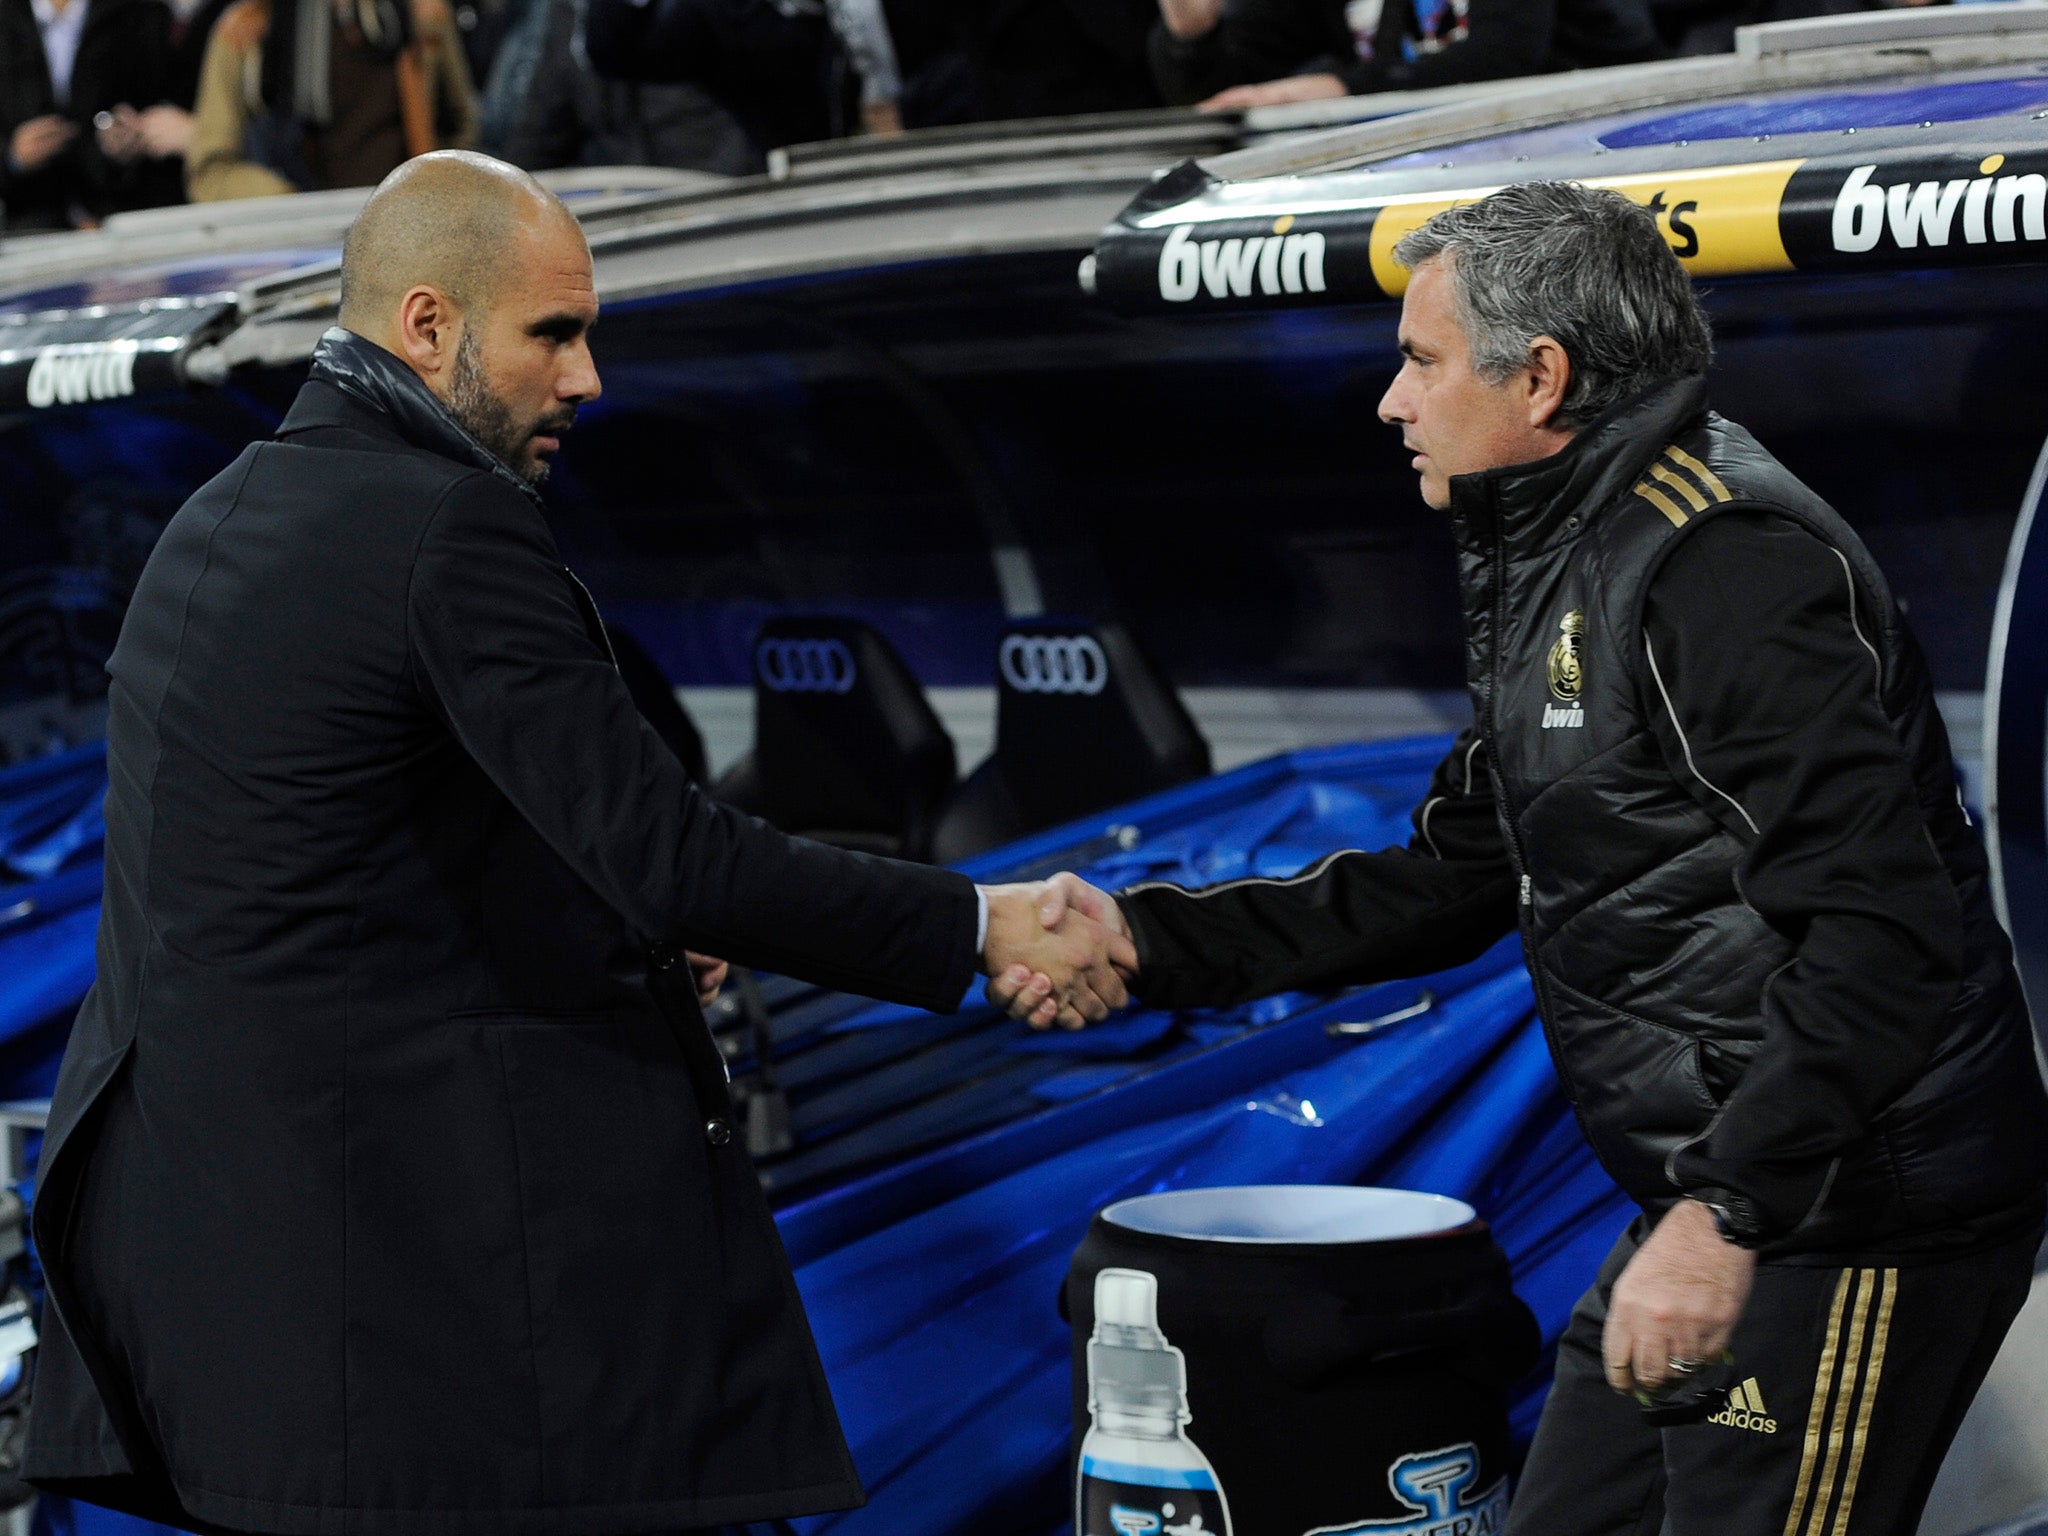 Police have been warned about the implications of Pep Guardiola and Jose Mourinho's rivalry